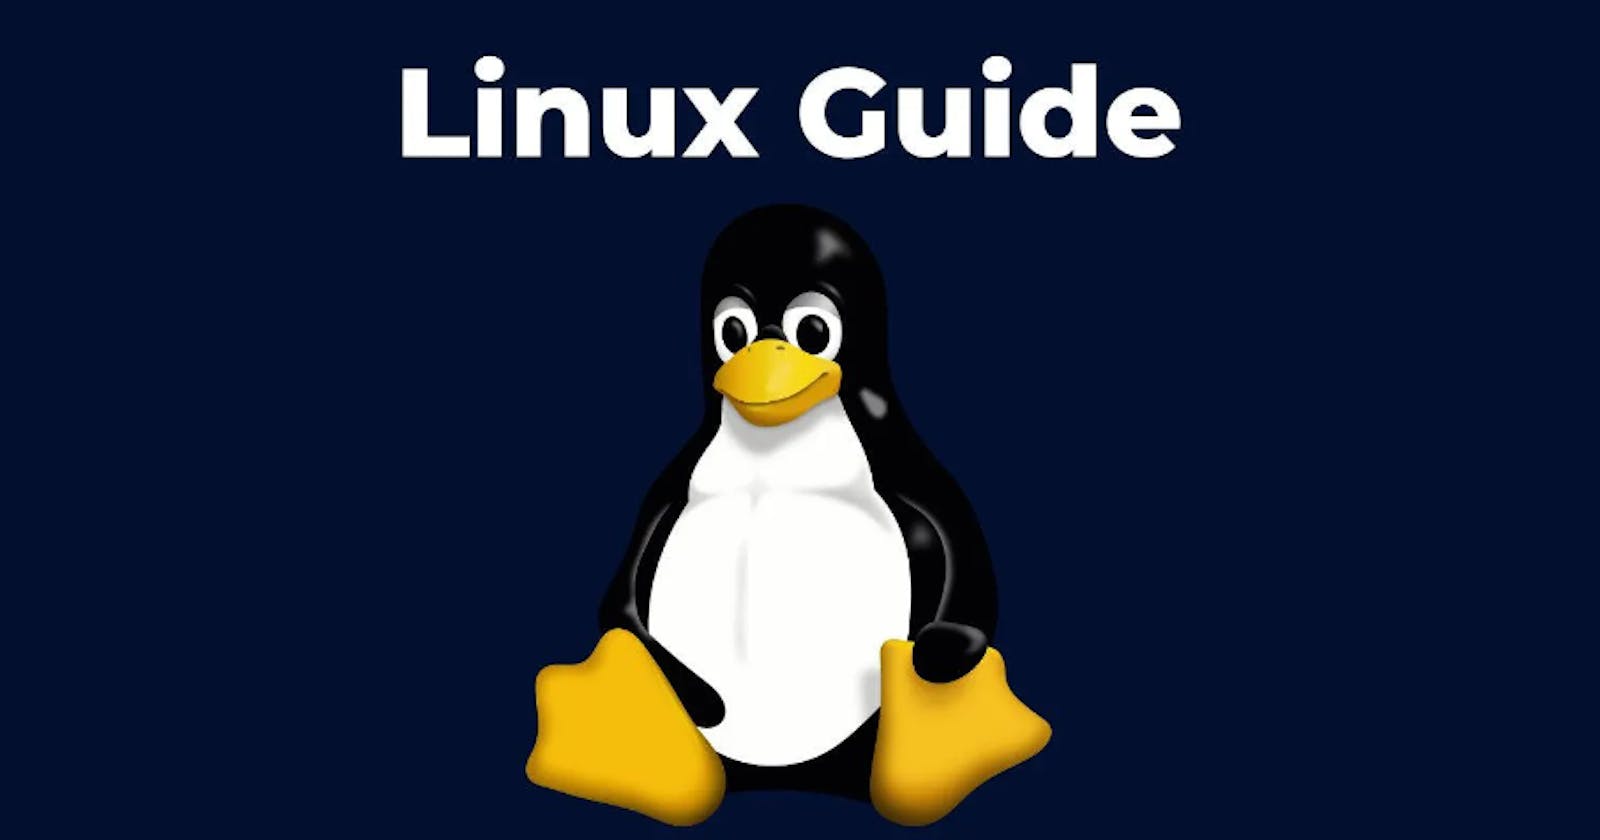 Introduction to basic Linux commands